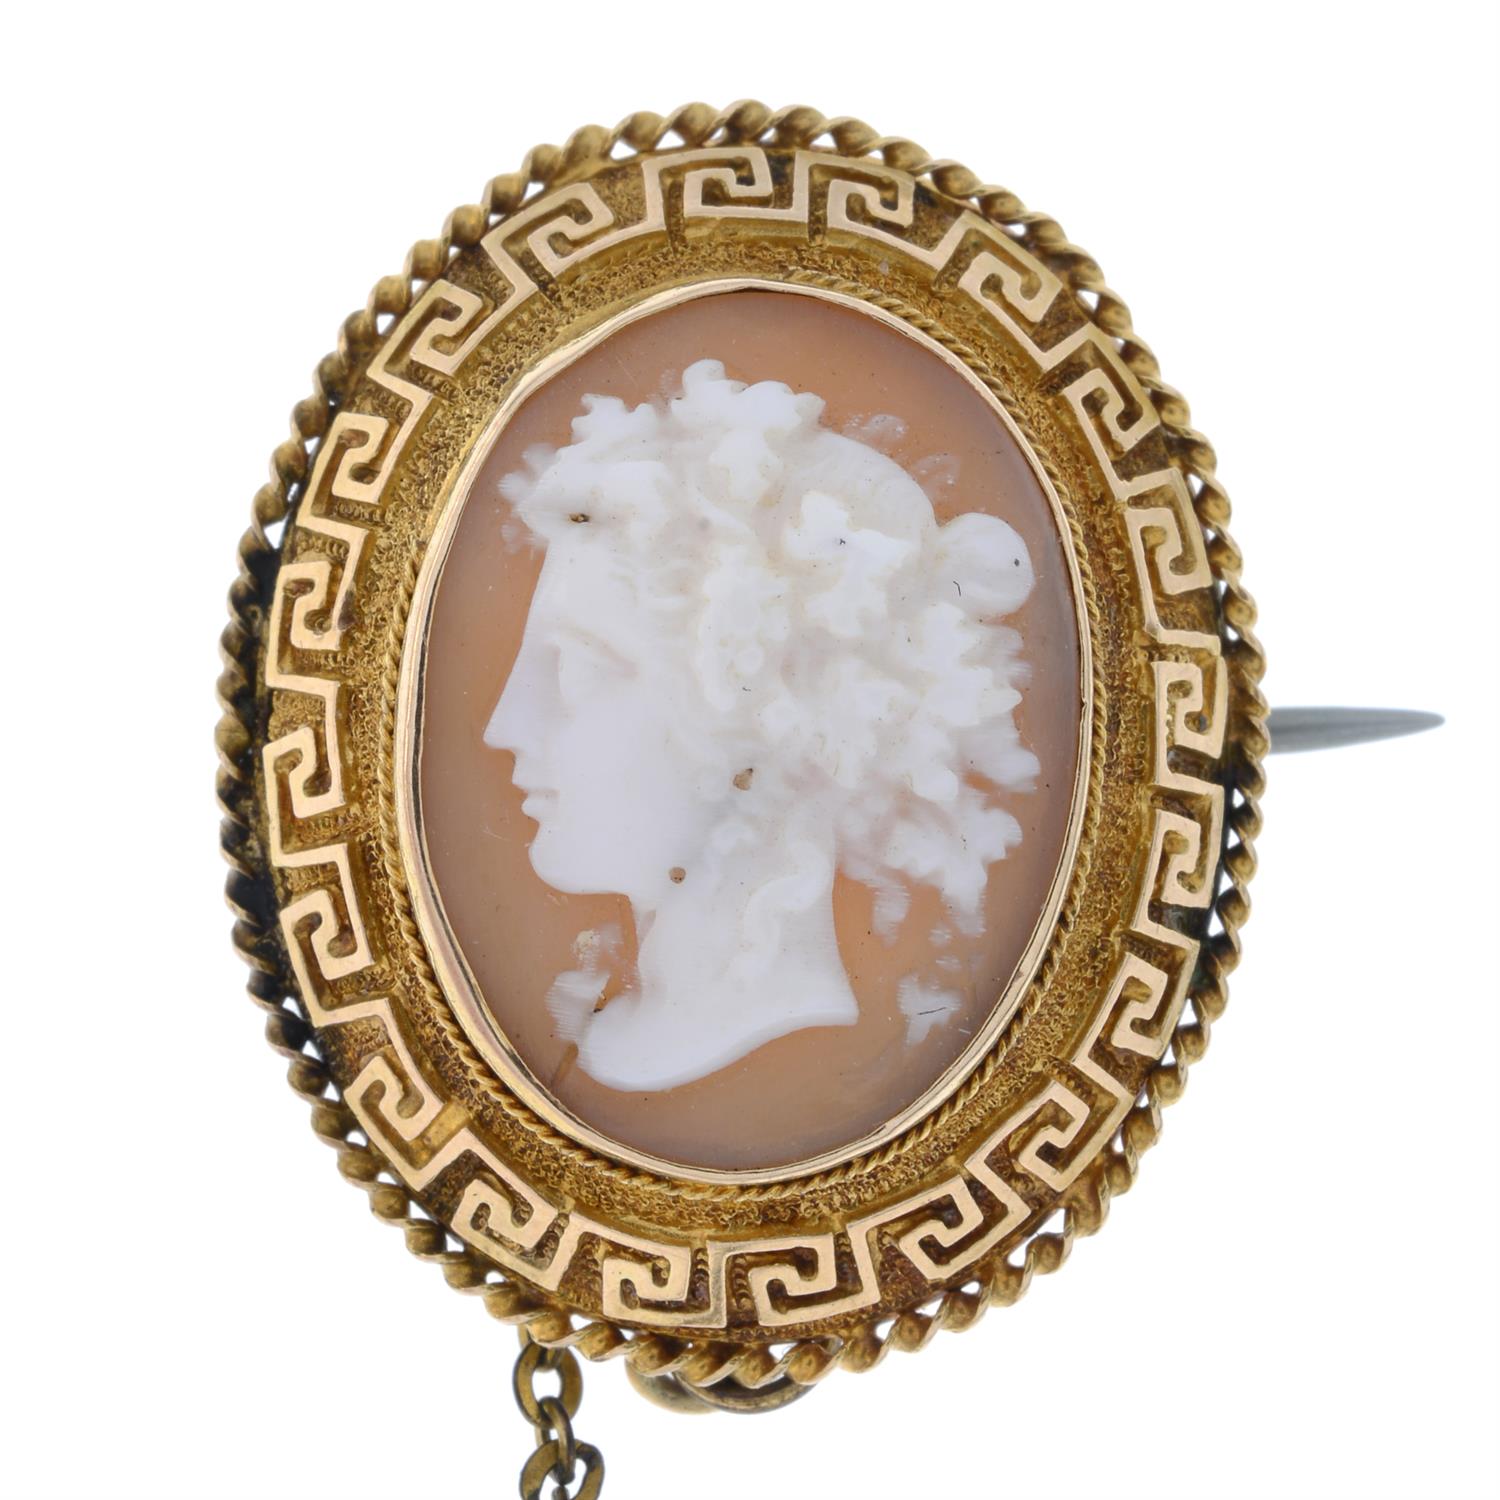 Shell cameo brooch, with Greek key motif surround